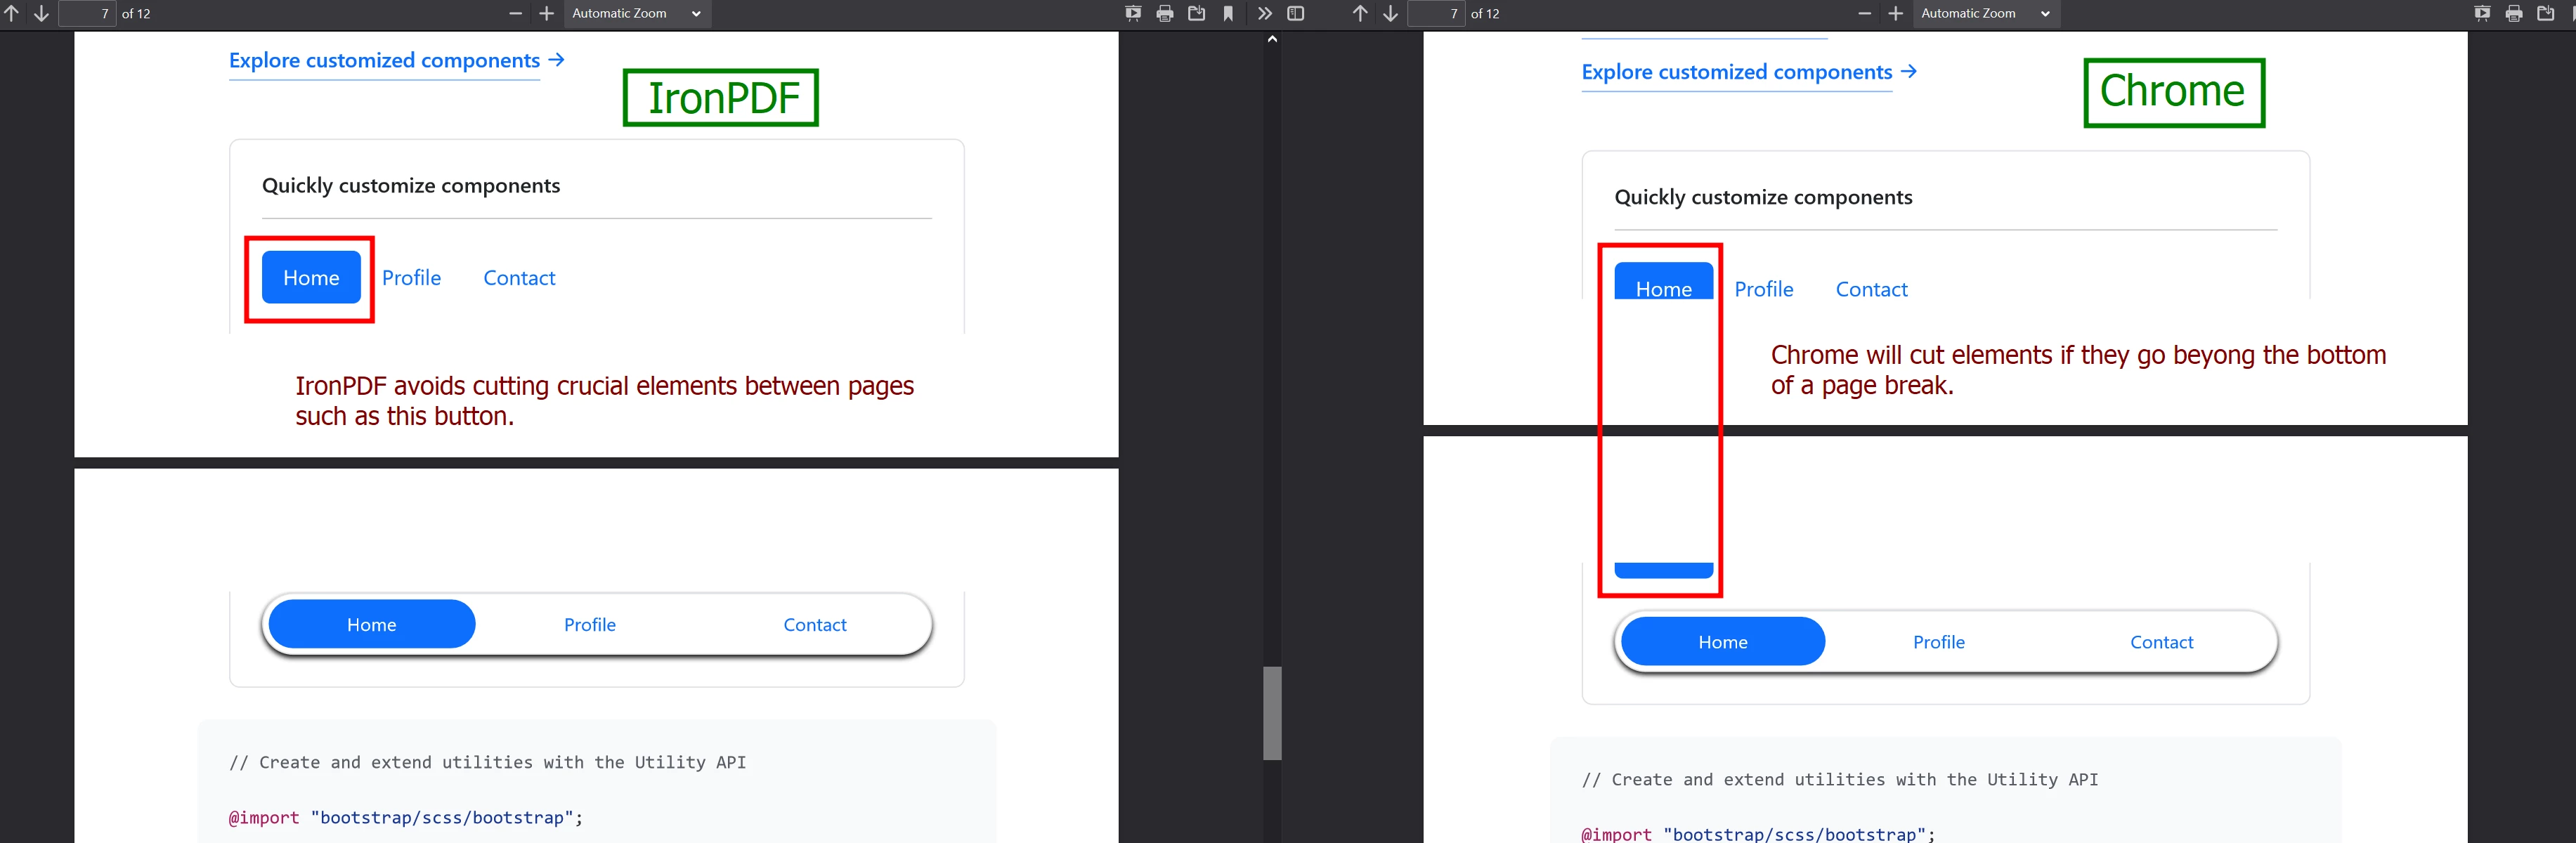 Button Cut off in Chrome but not in IronPDF